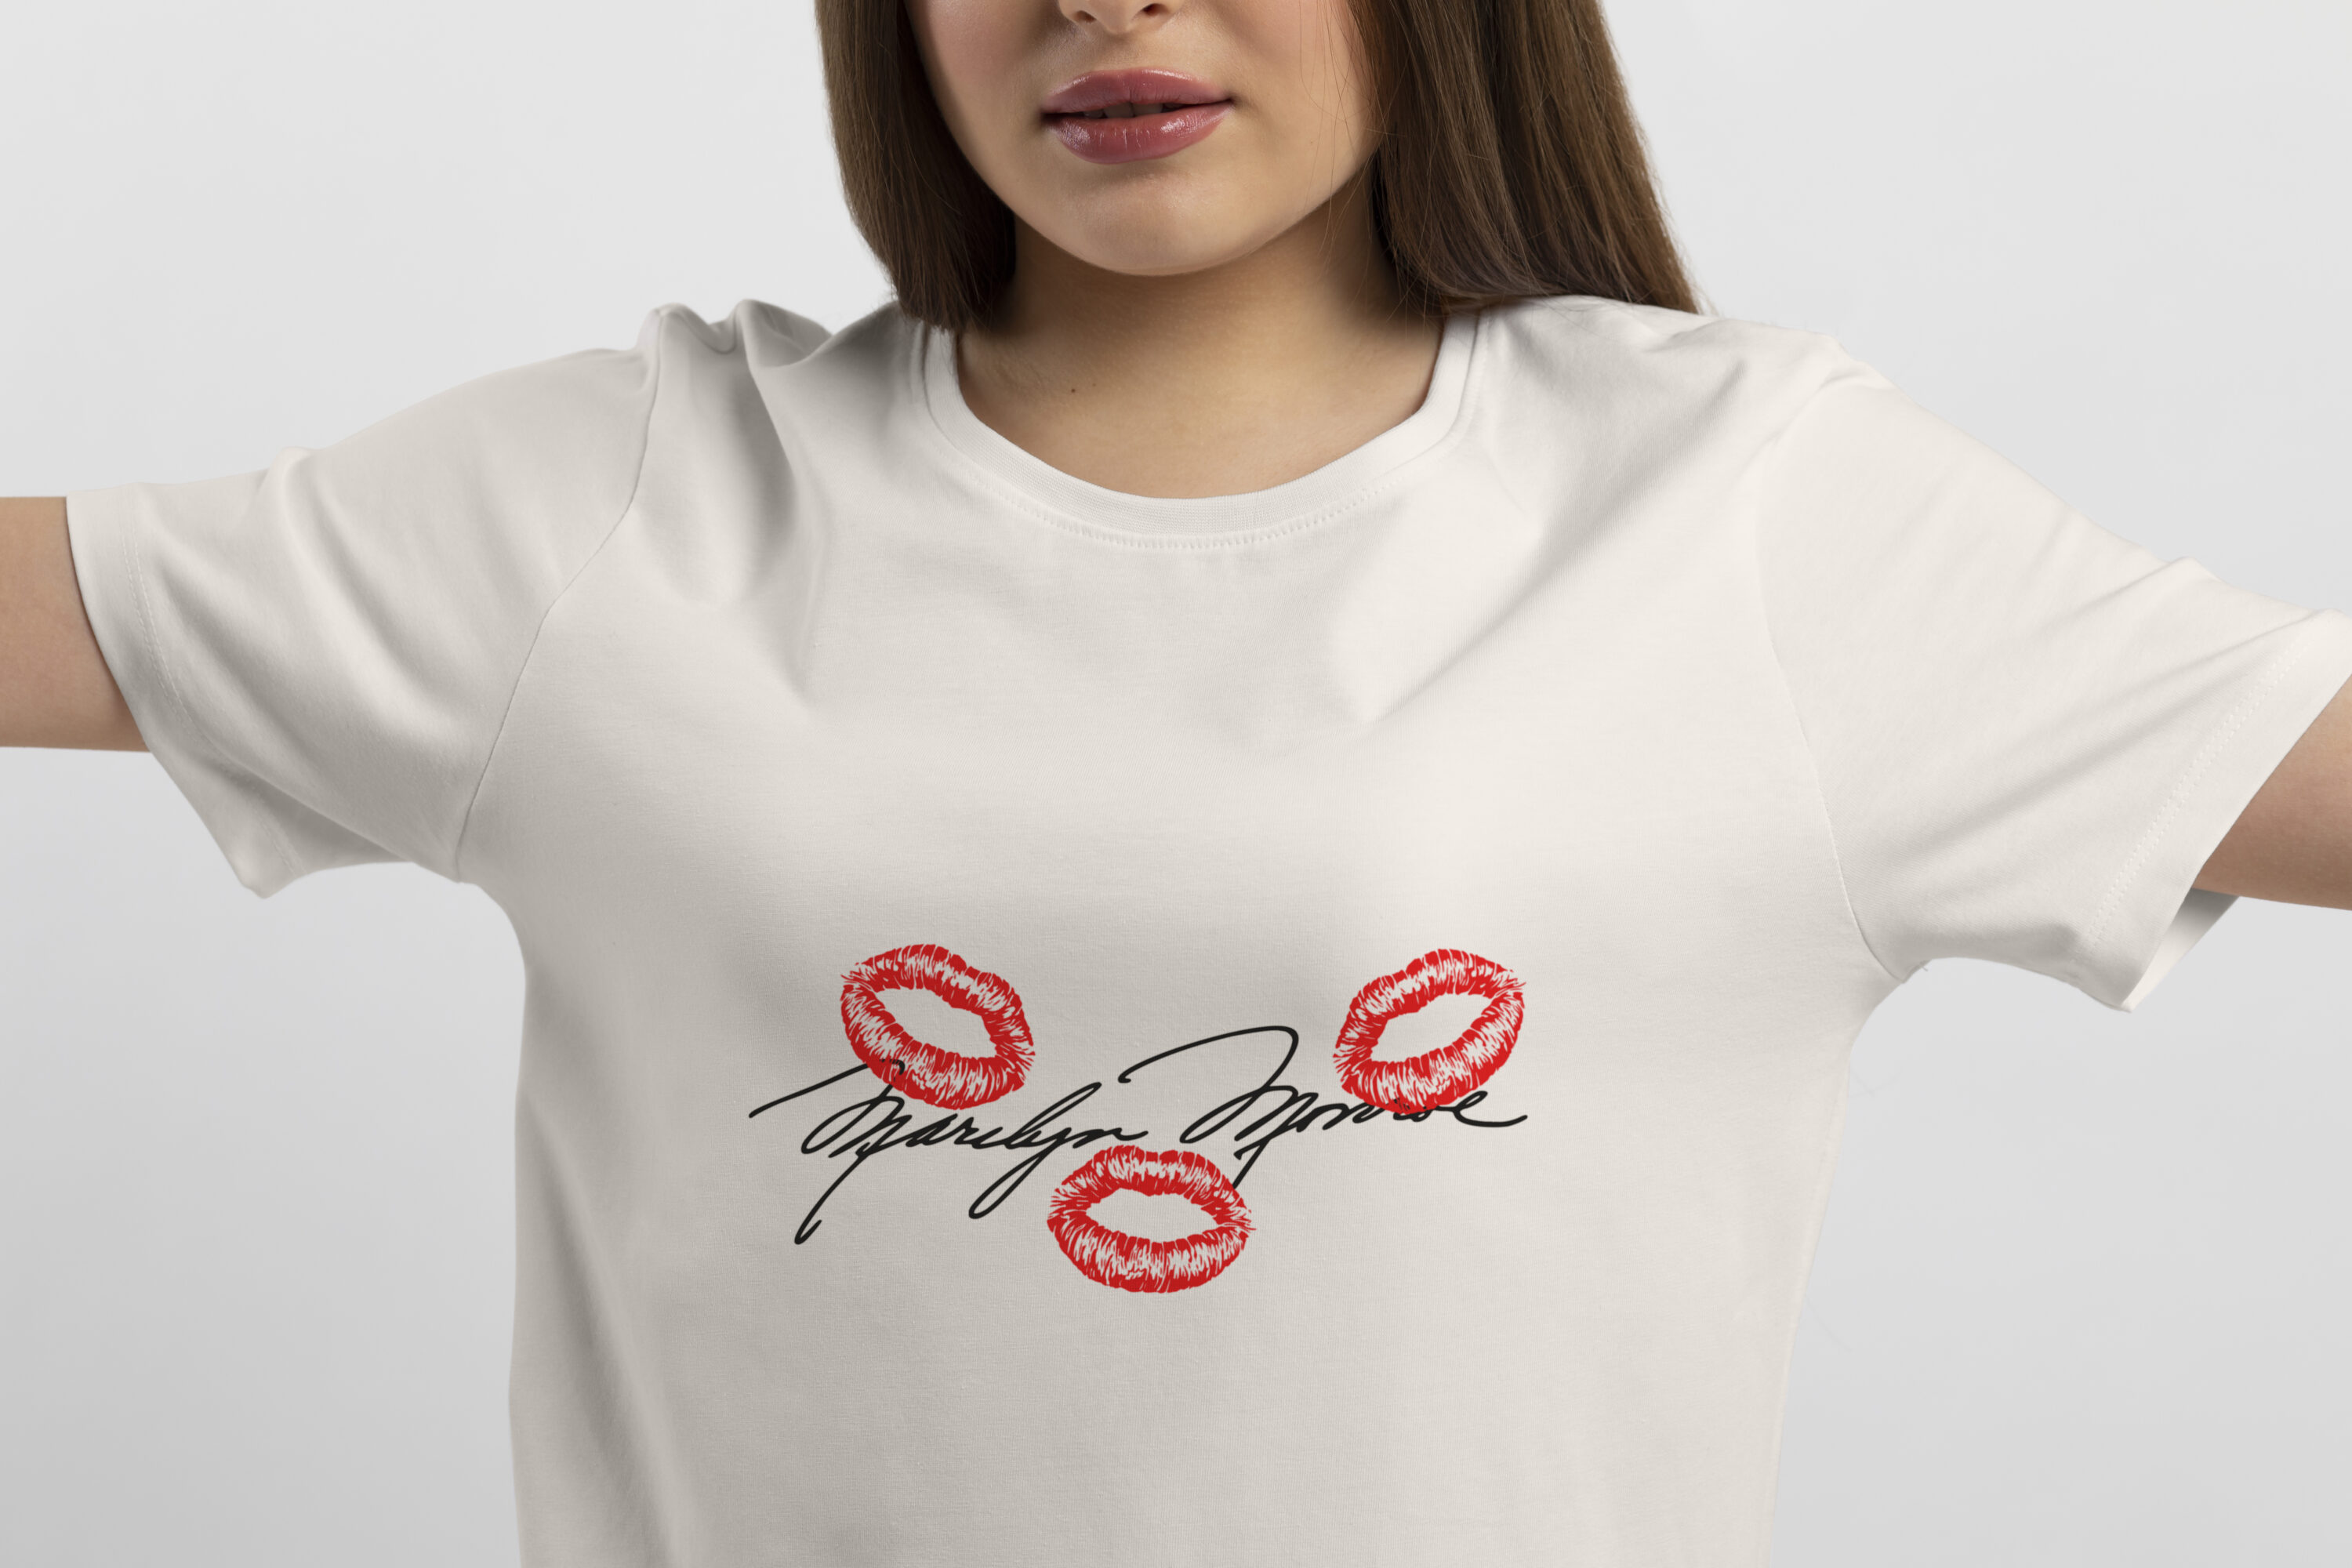 Image of a white t-shirt with a colorful print of Marilyn Monroe's signature and her lips imprint.